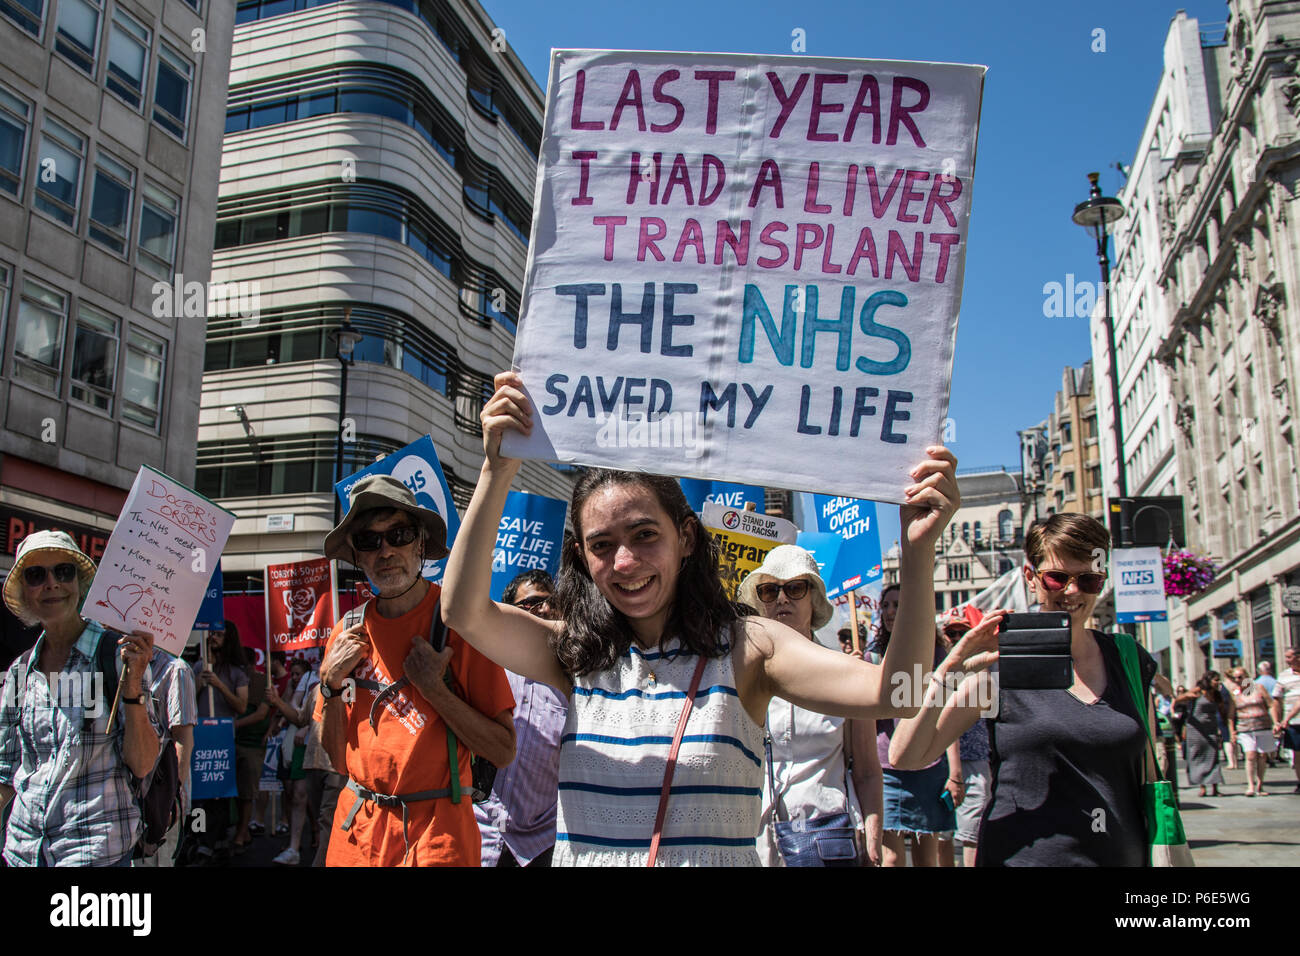 London, UK. 30 June, 2018. London,UK. A Young woman holds up her placard which reads " Last year I had a liver transplant, the NHS saved my life'. With the NHS 70 years old this year, thousands marched through central London in a National rally to show support for the service and to demand more funding from the Government. David Rowe/Alamy Live News Stock Photo